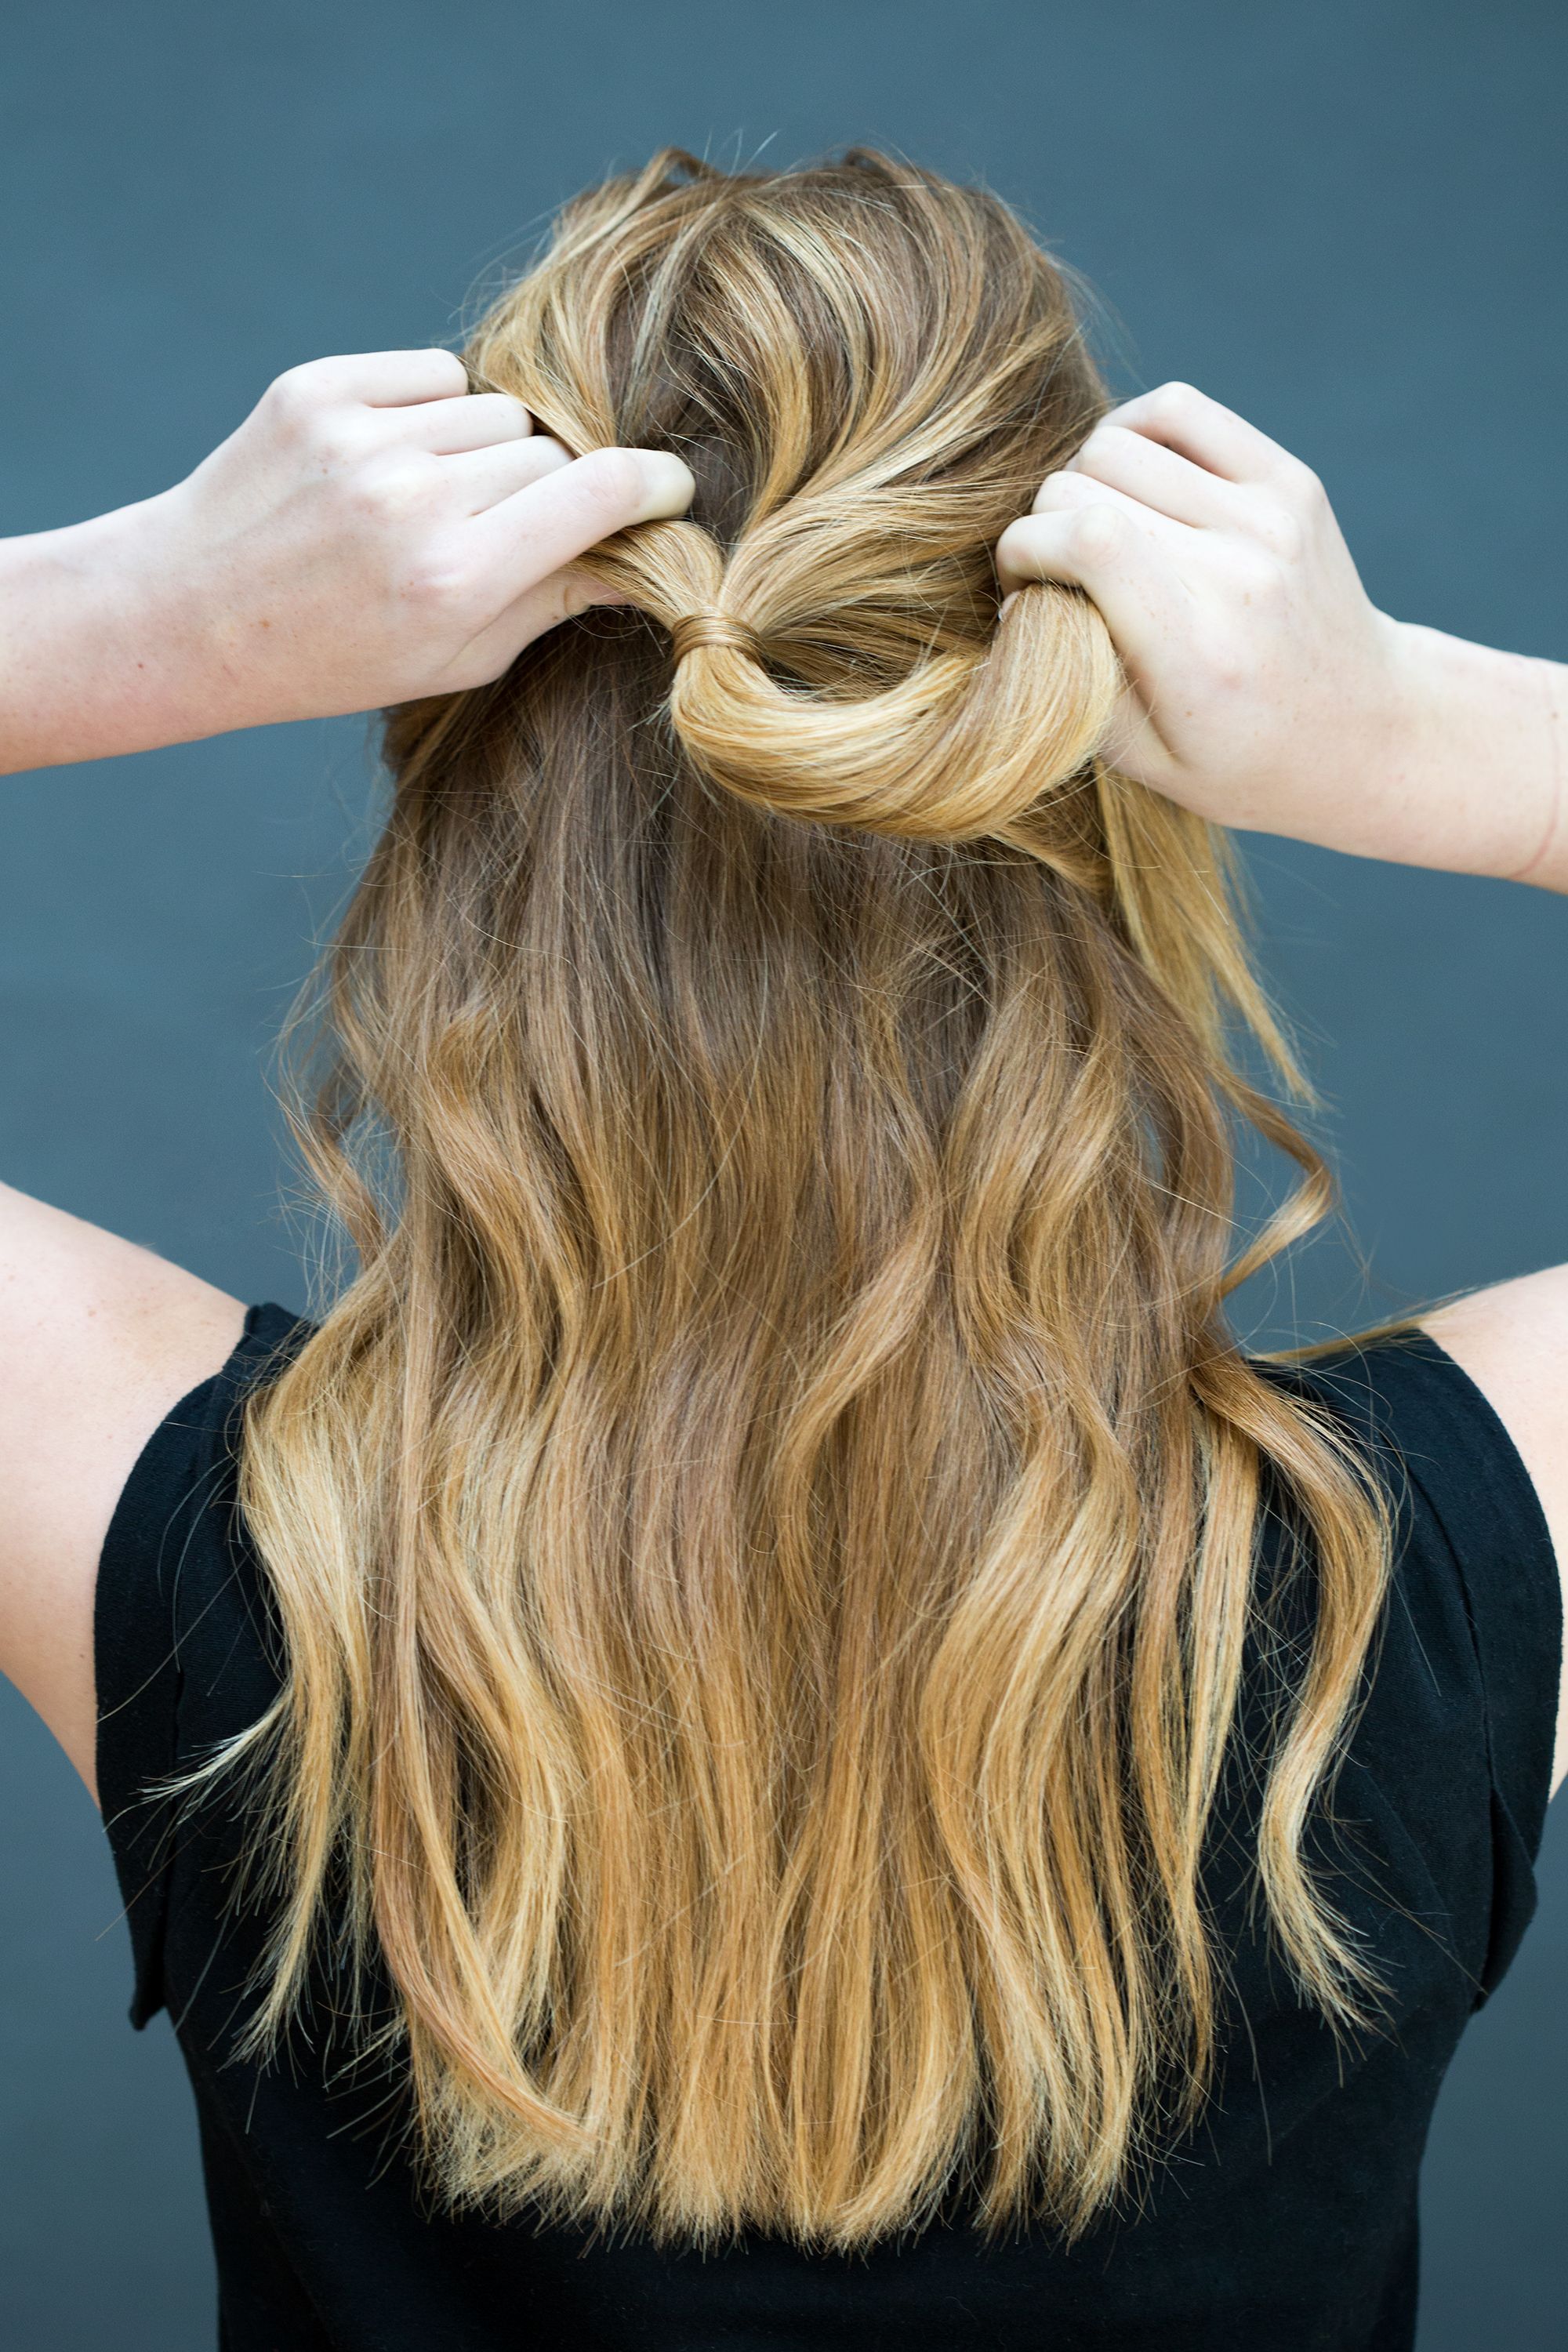 10 Easy Hairstyles You Can Do in 10 Seconds - DIY Hairstyles